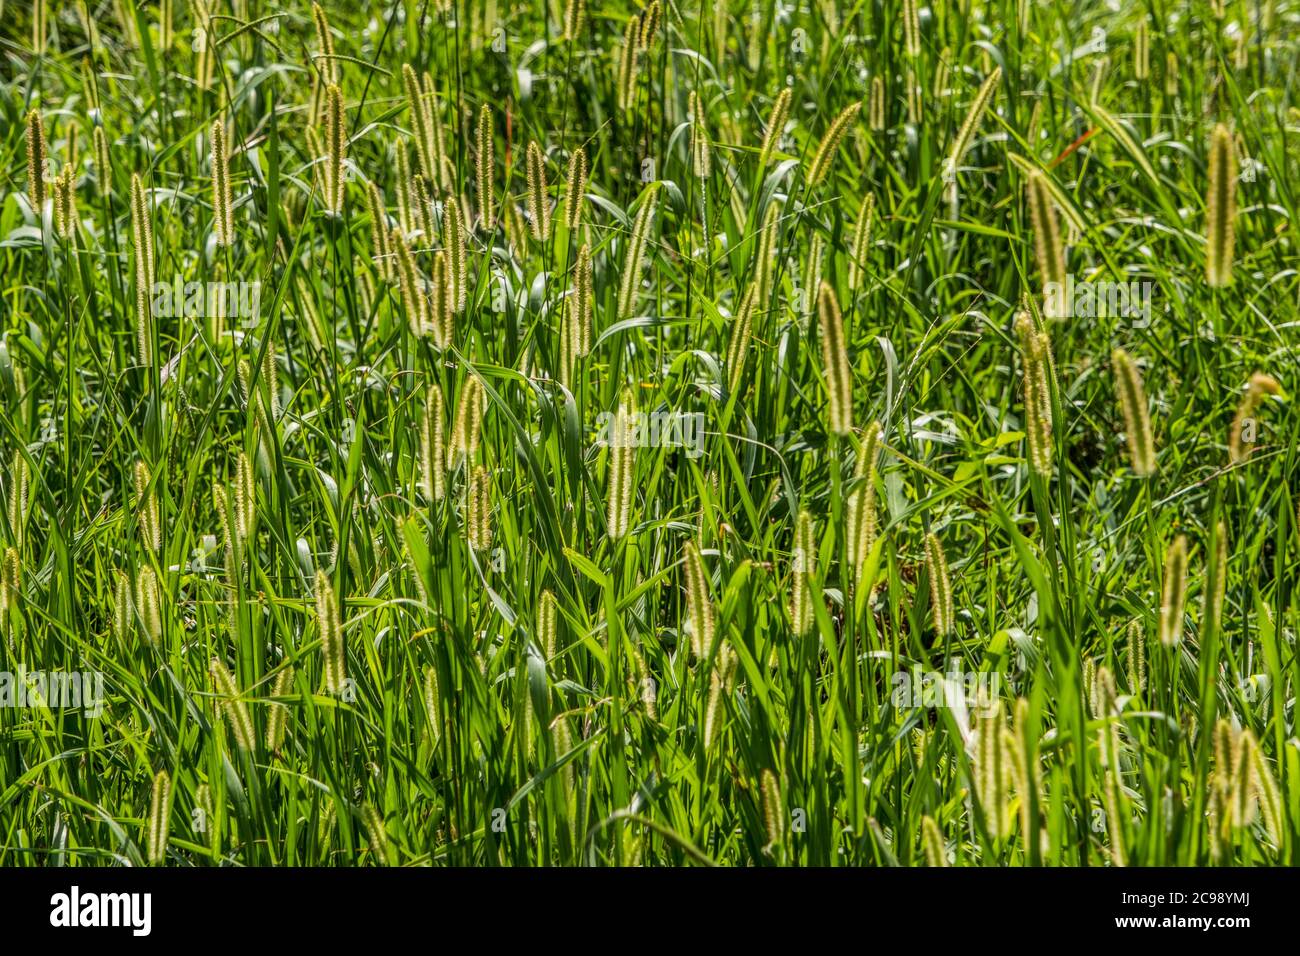 The morning sunlight glowing through the field back lighting the foxtail grasses closeup showing lots of textures for backgrounds and wallpaper Stock Photo